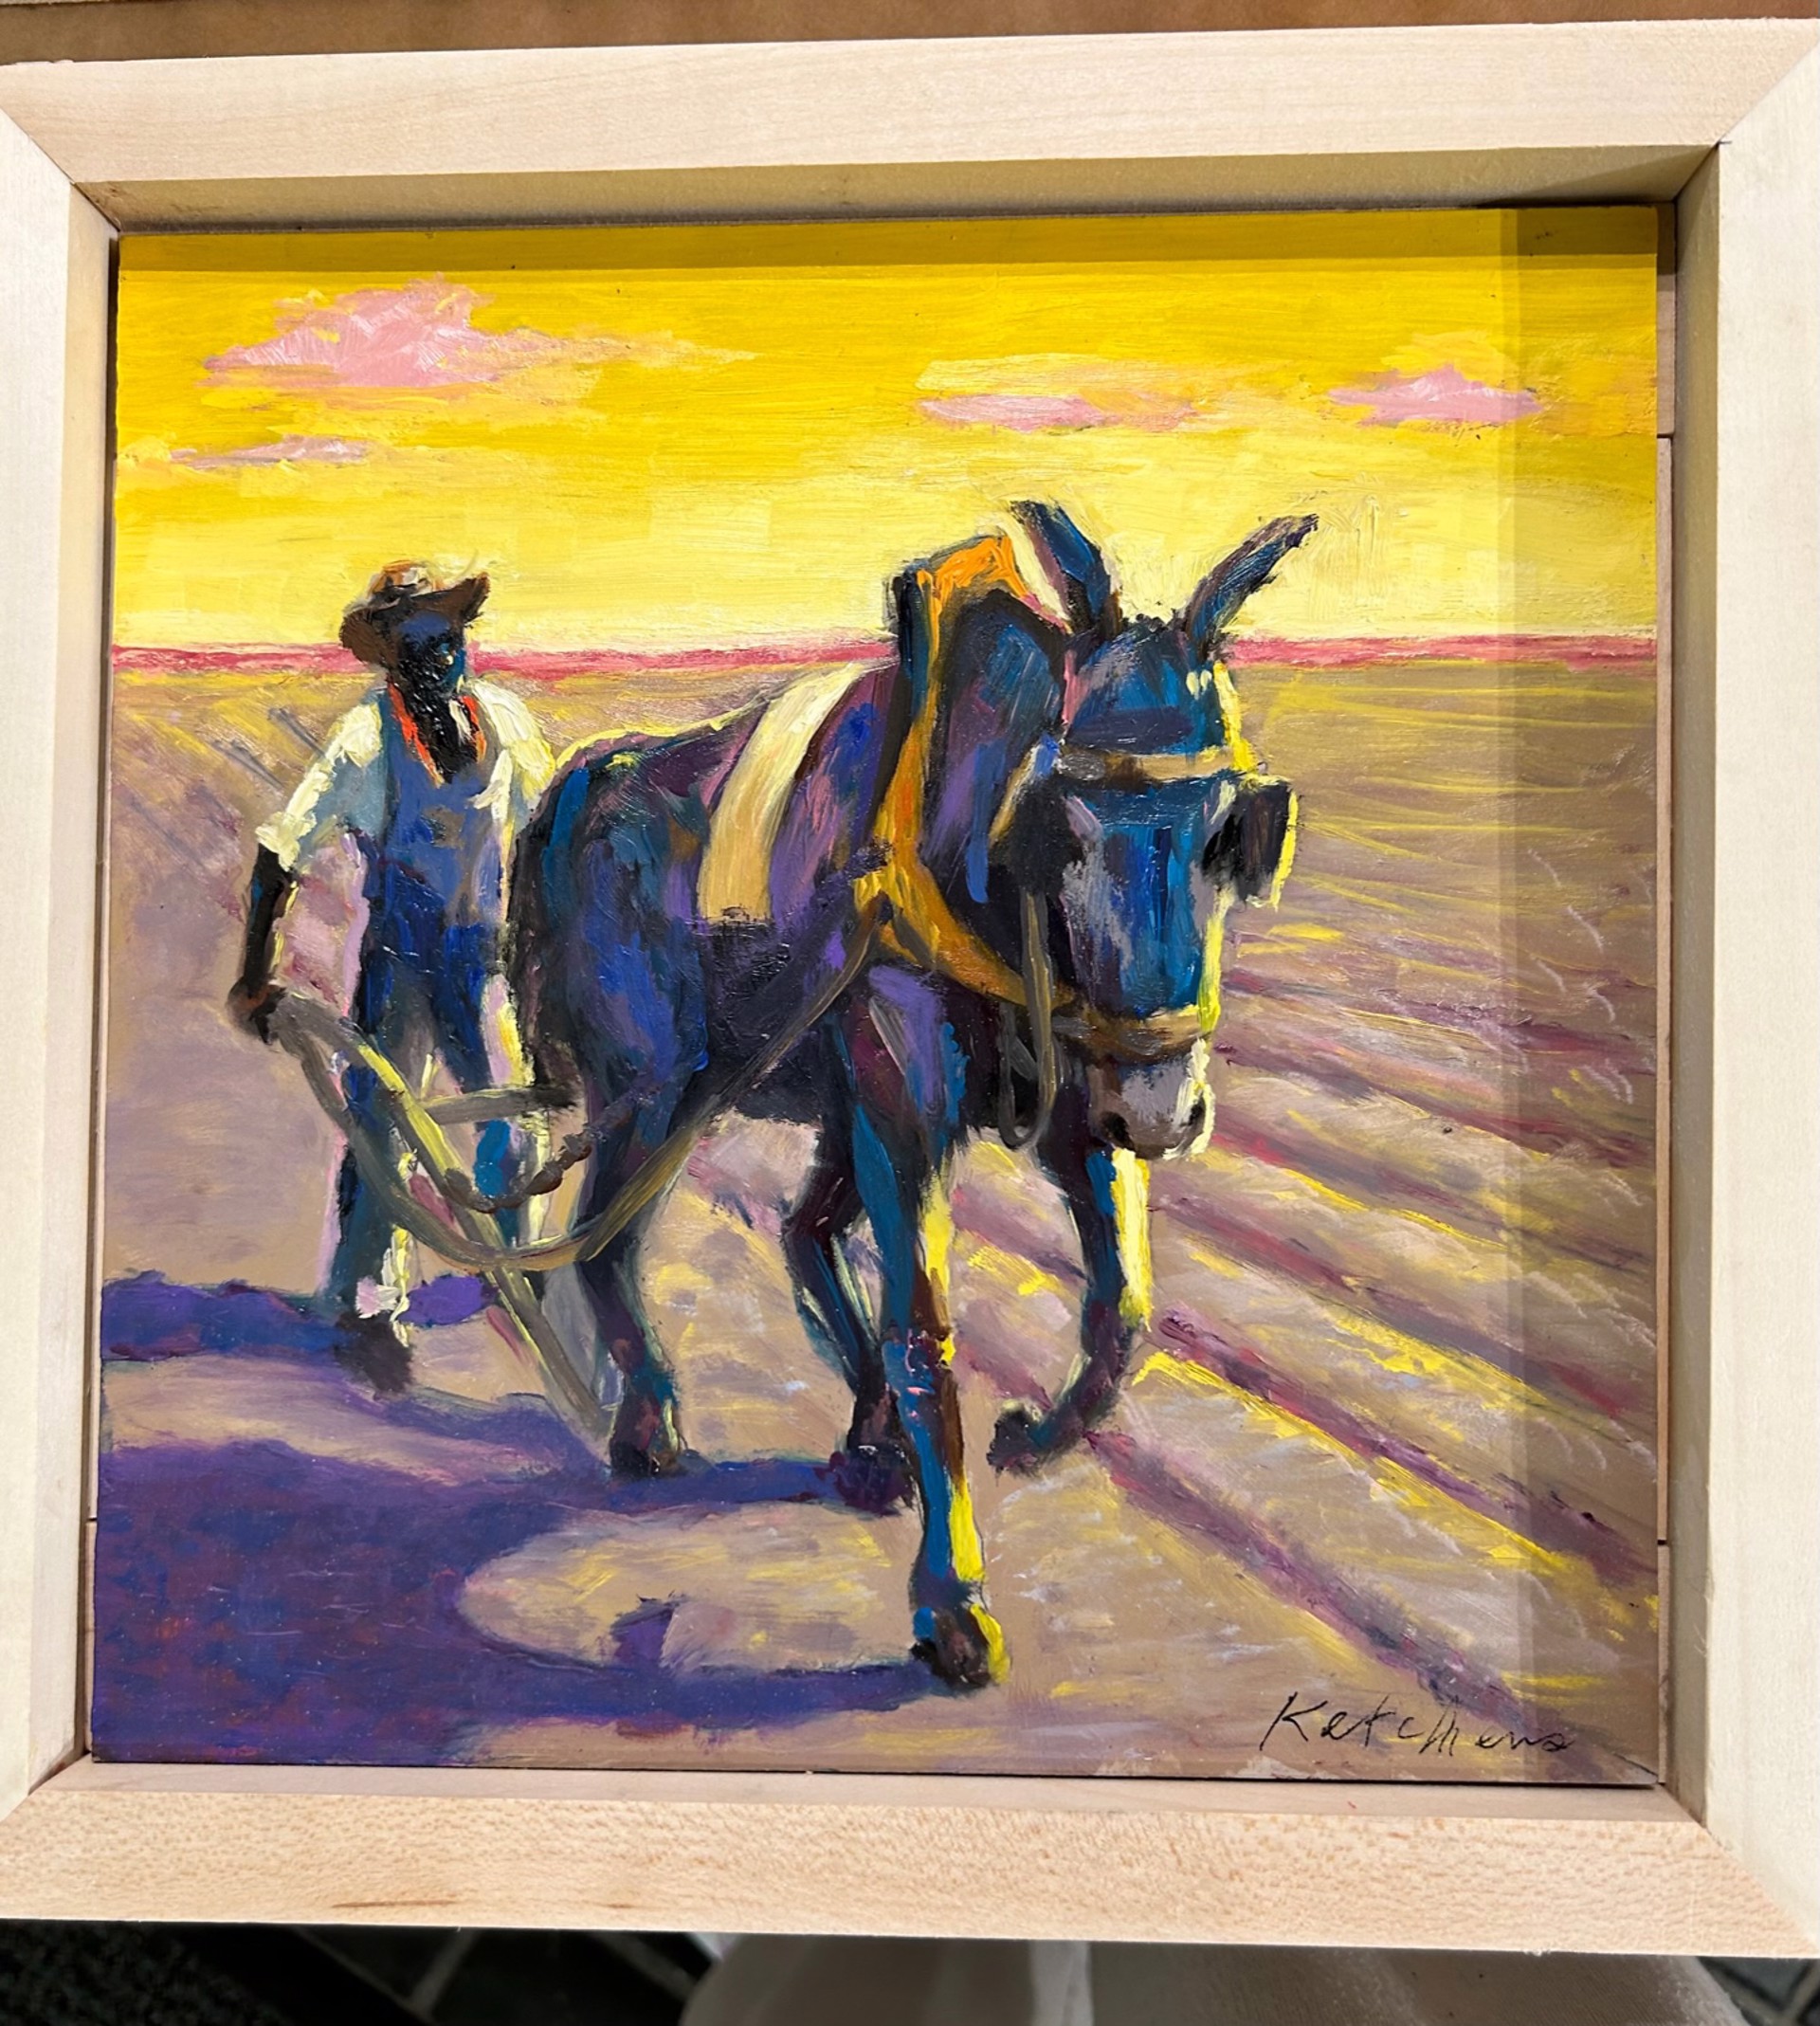 "40 Acres and A Mule" by Robert Ketchens